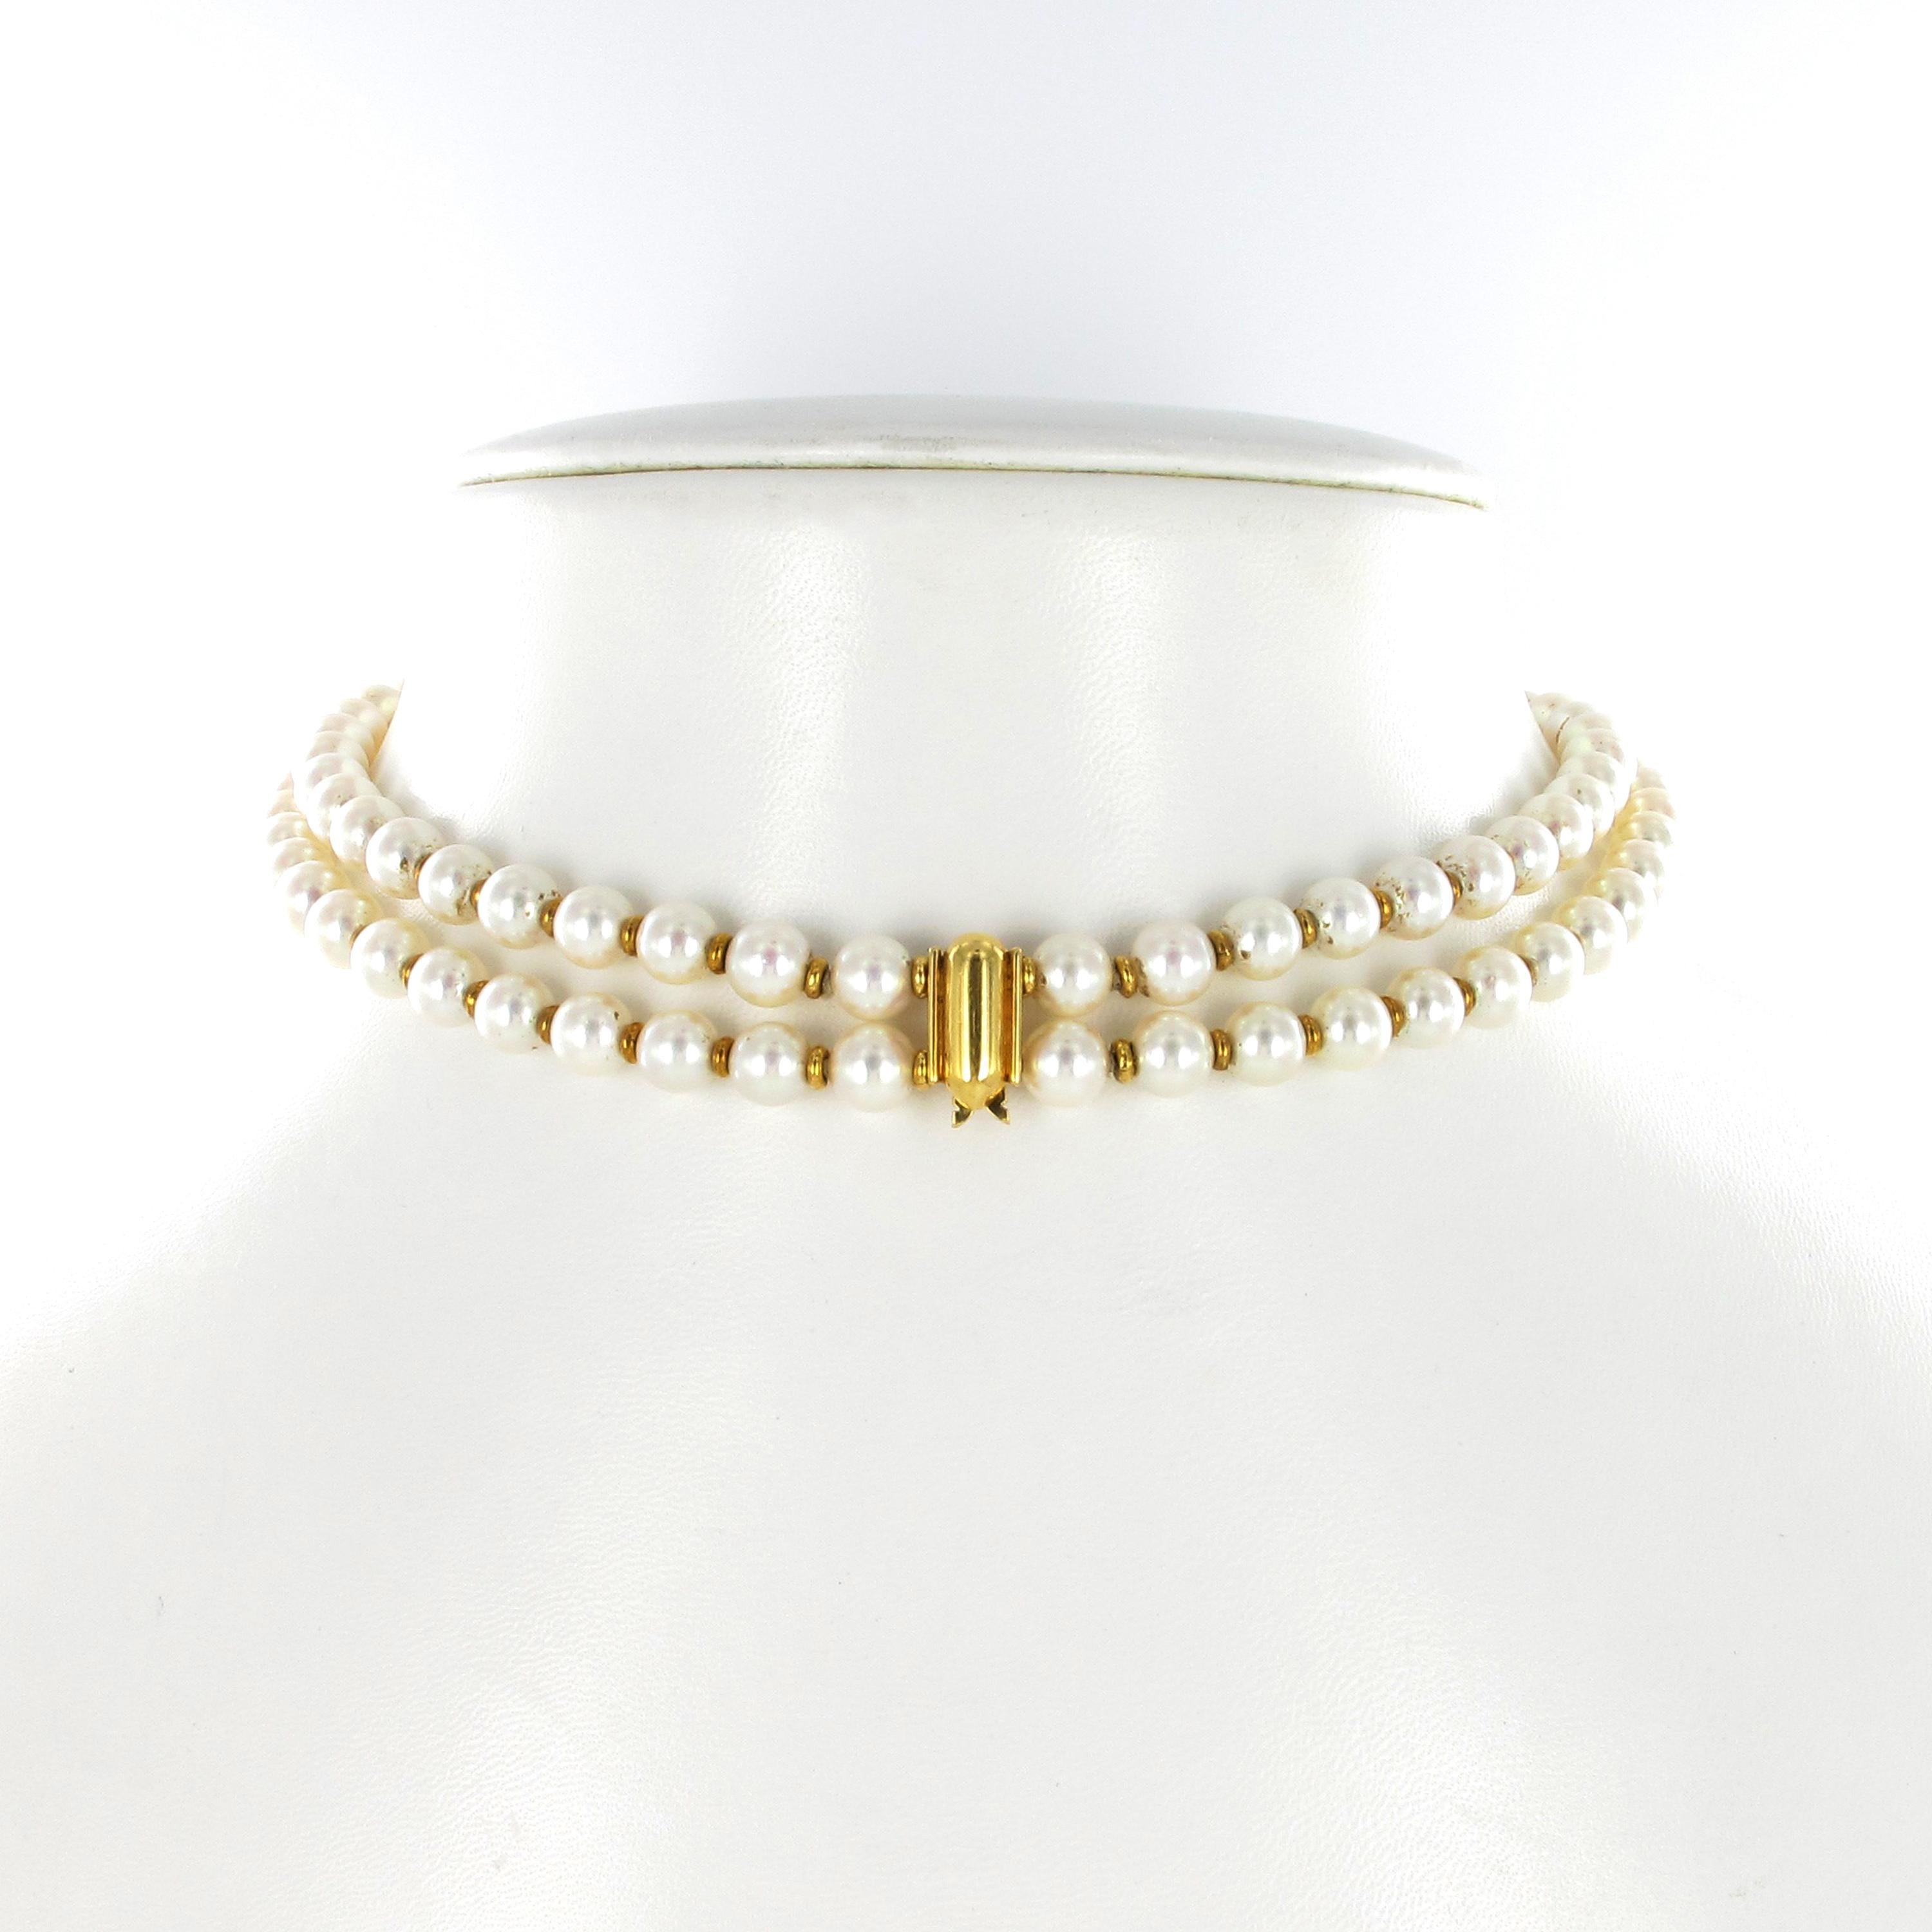 Artisan Fabulous Boucheron Cultured Pearl, Sapphire, and Diamond Necklace in Yellow Gold